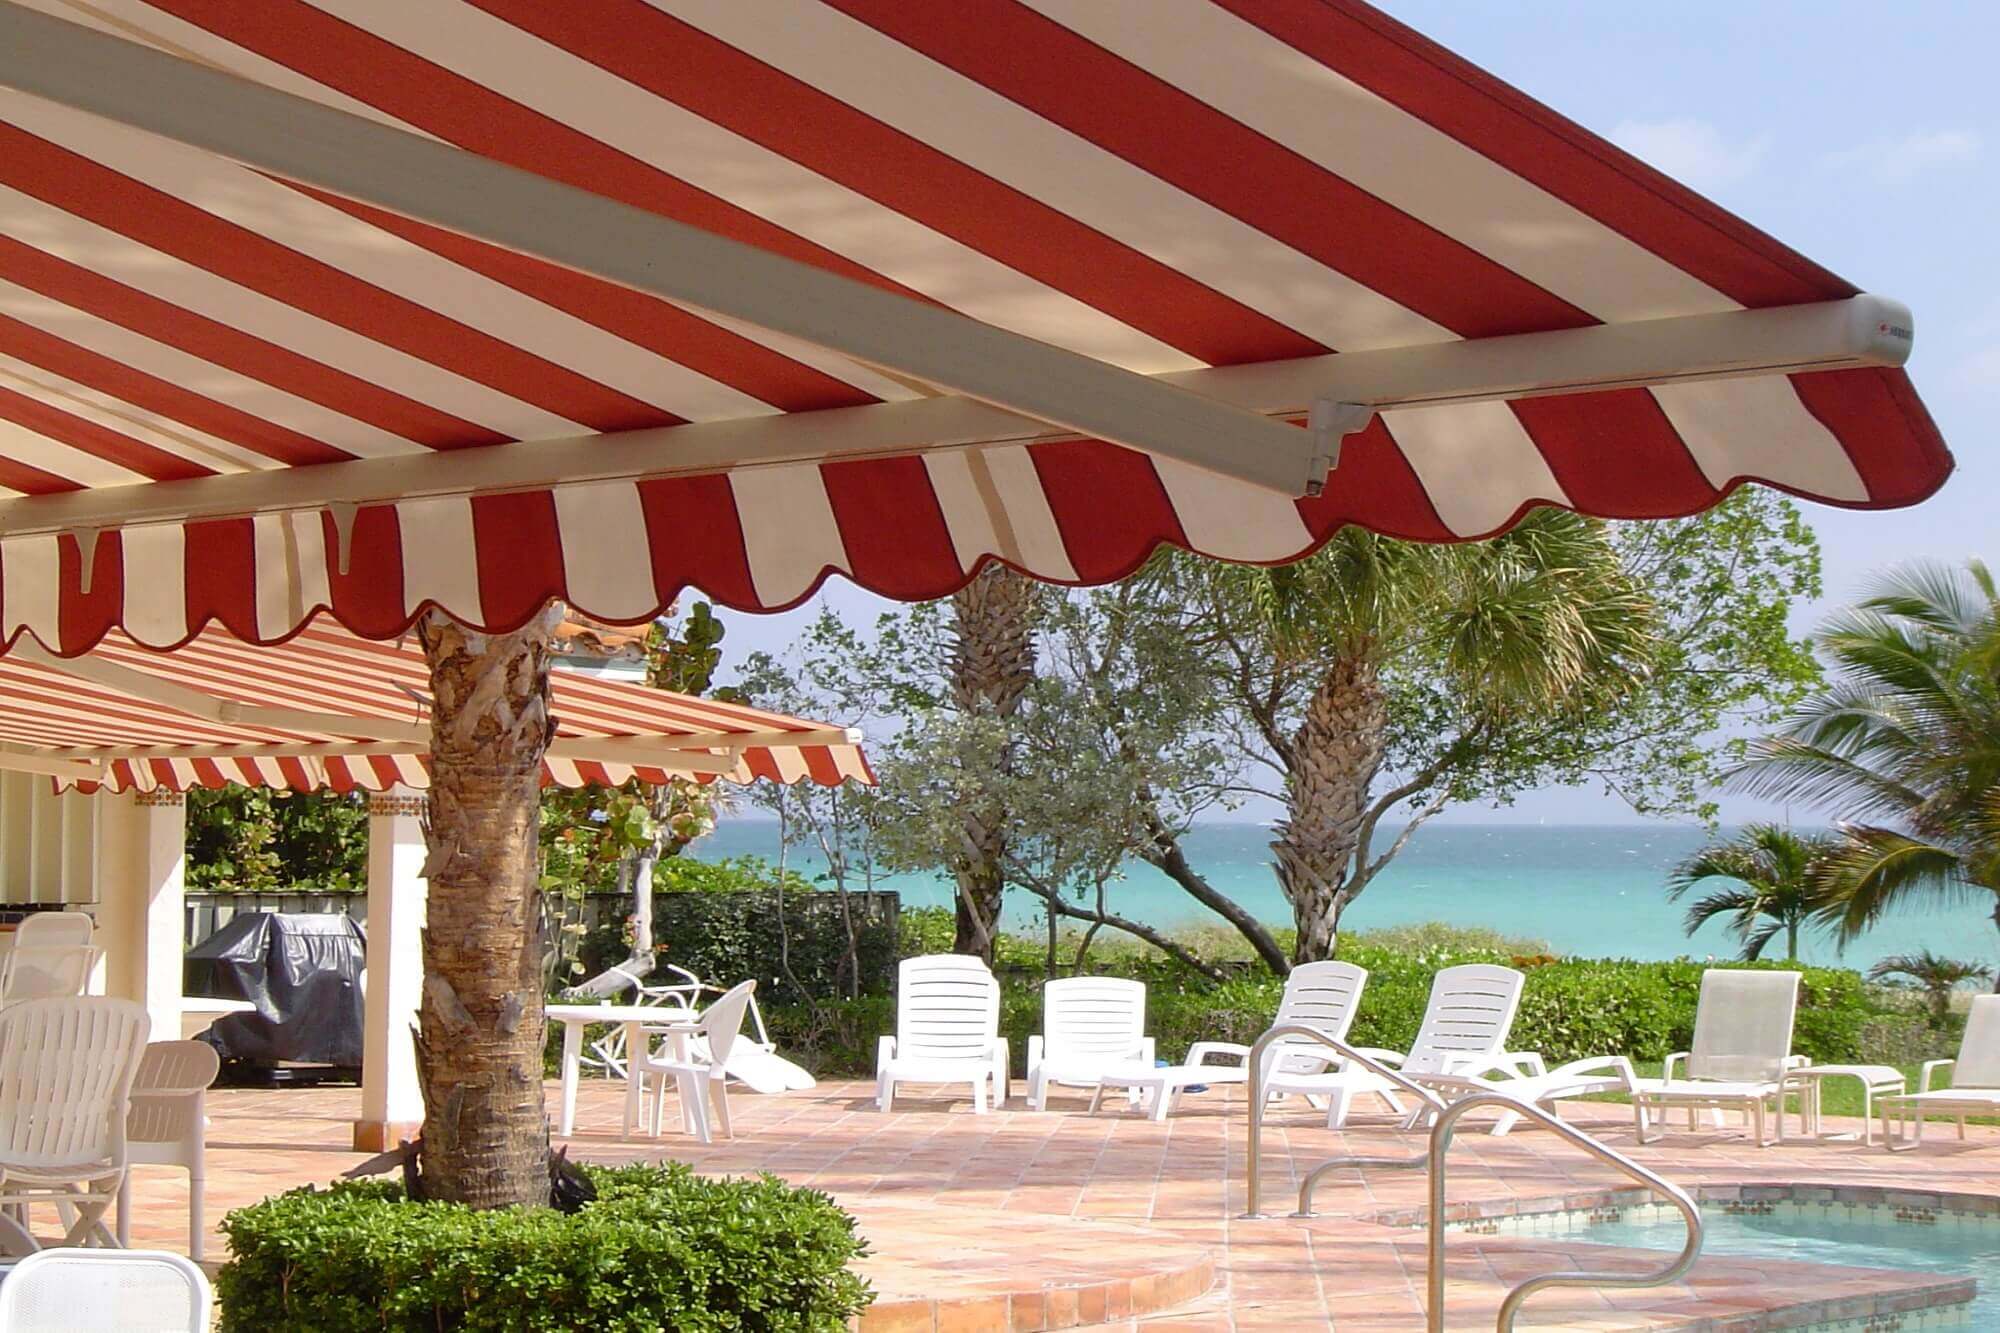 Palermo plus retractable folding lateral arm awning